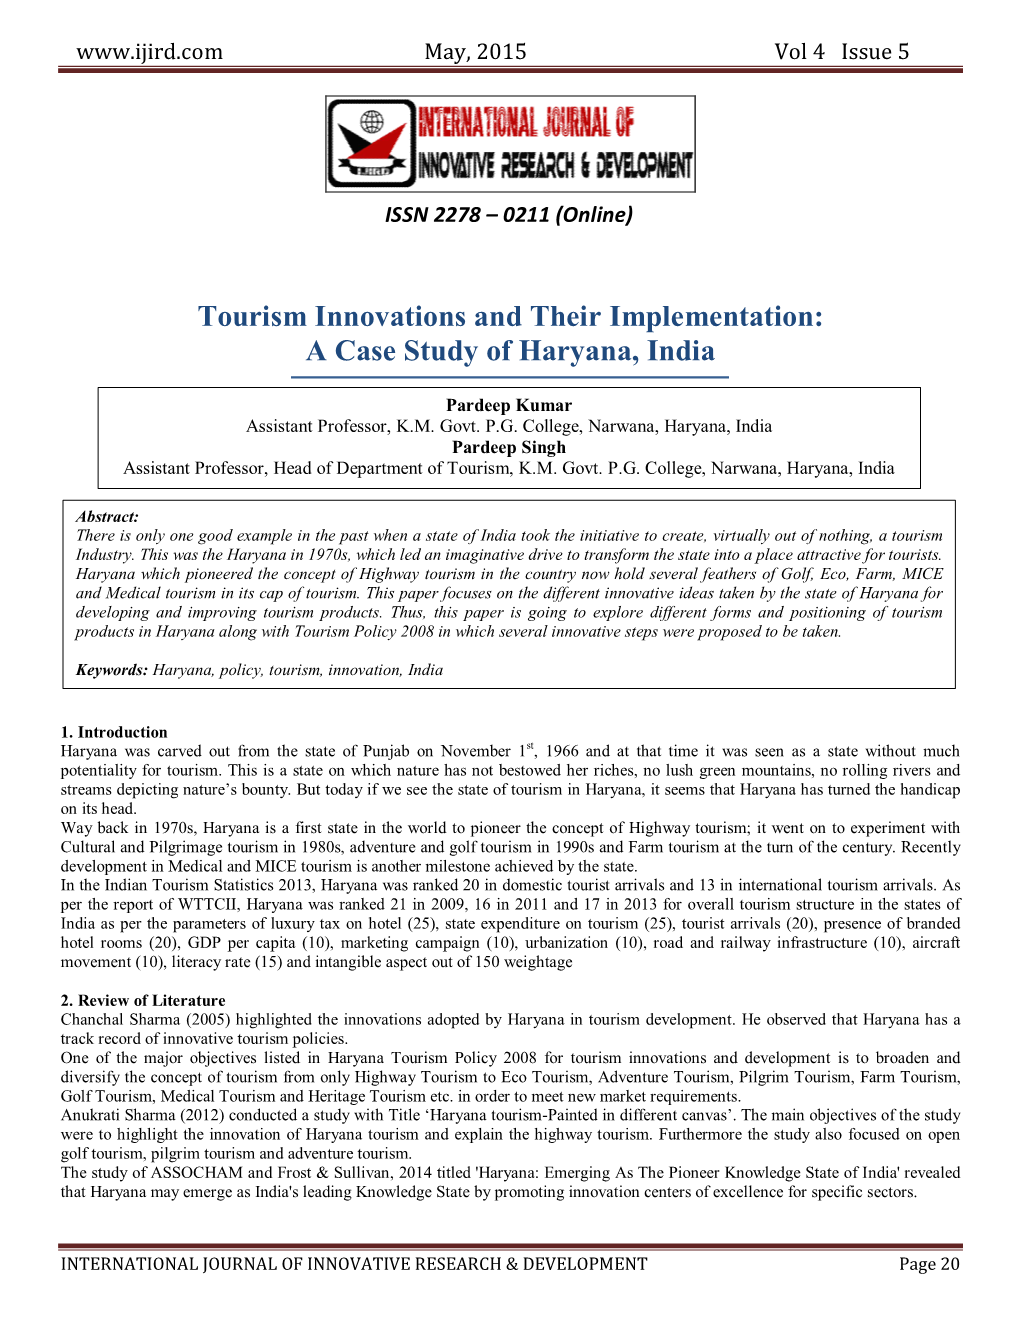 Tourism Innovations and Their Implementation: a Case Study of Haryana, India